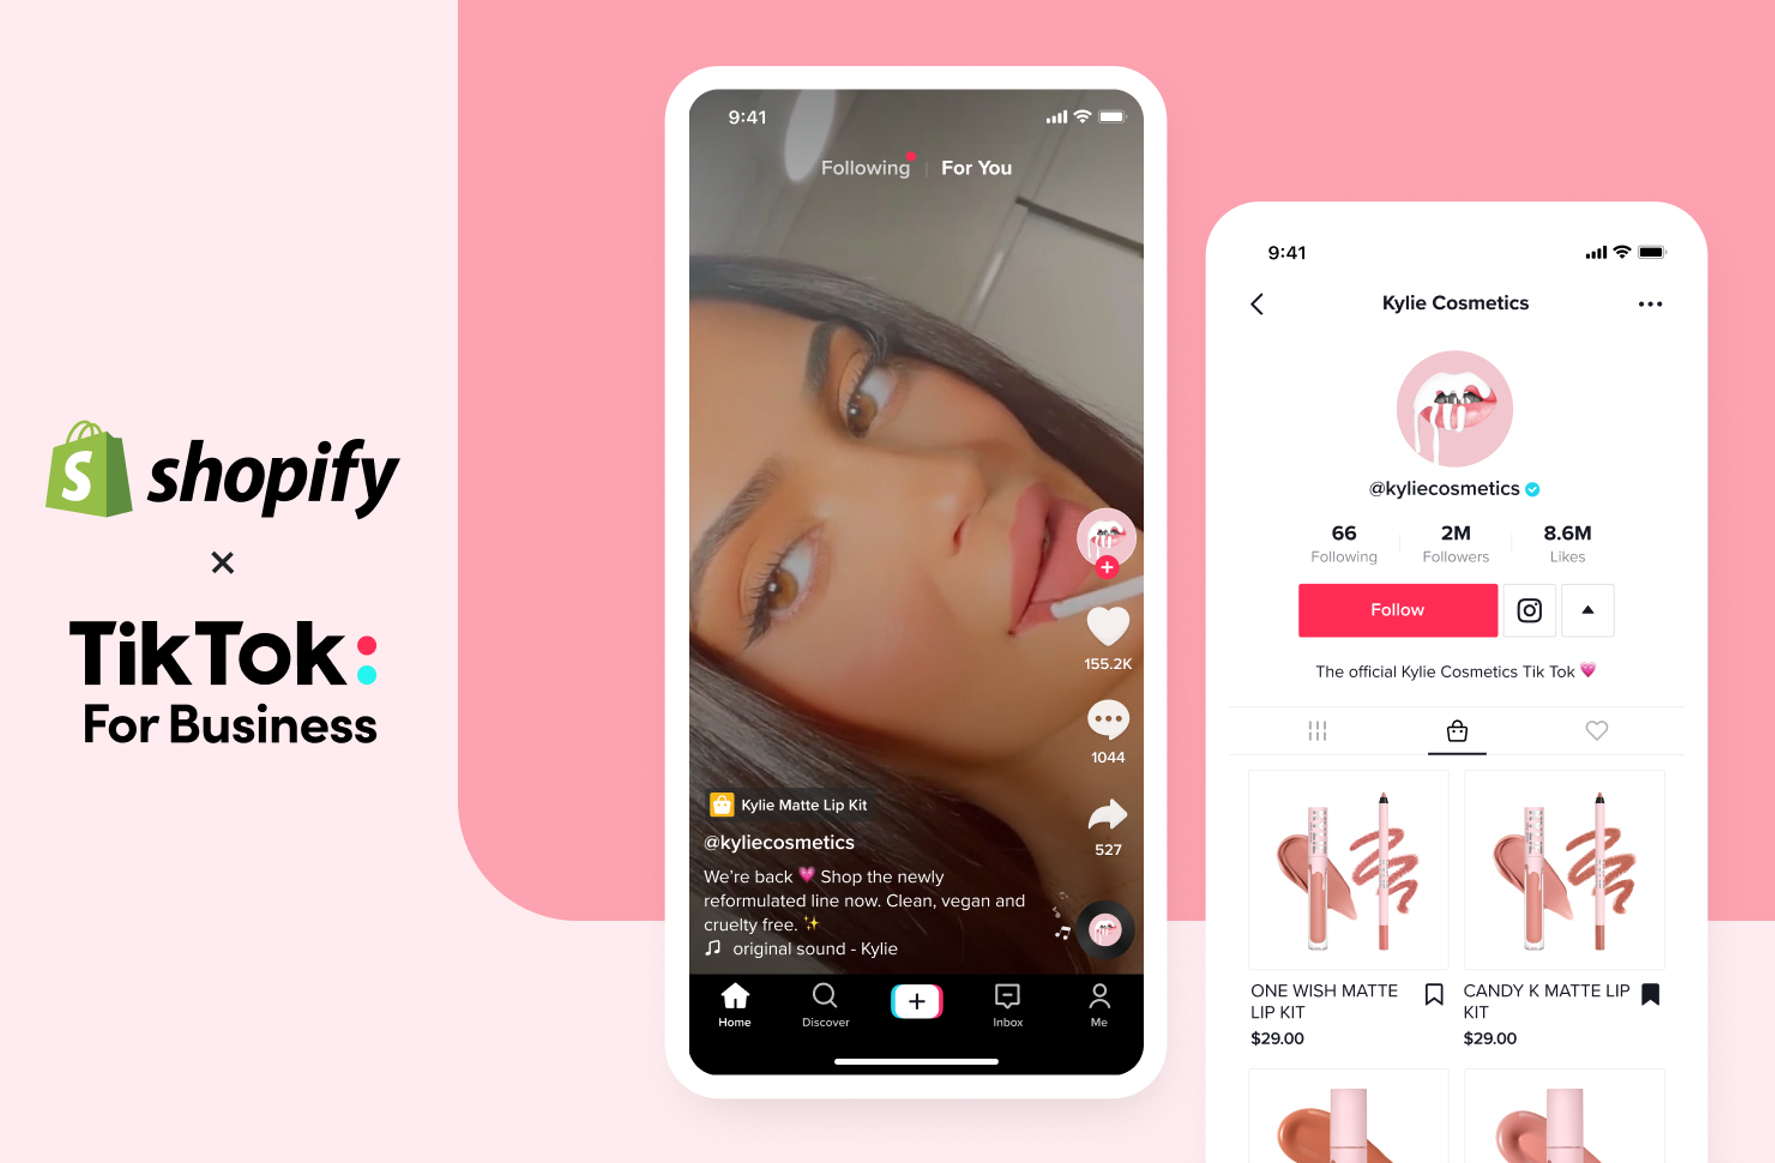 There's a new Shopping tab on TikTok